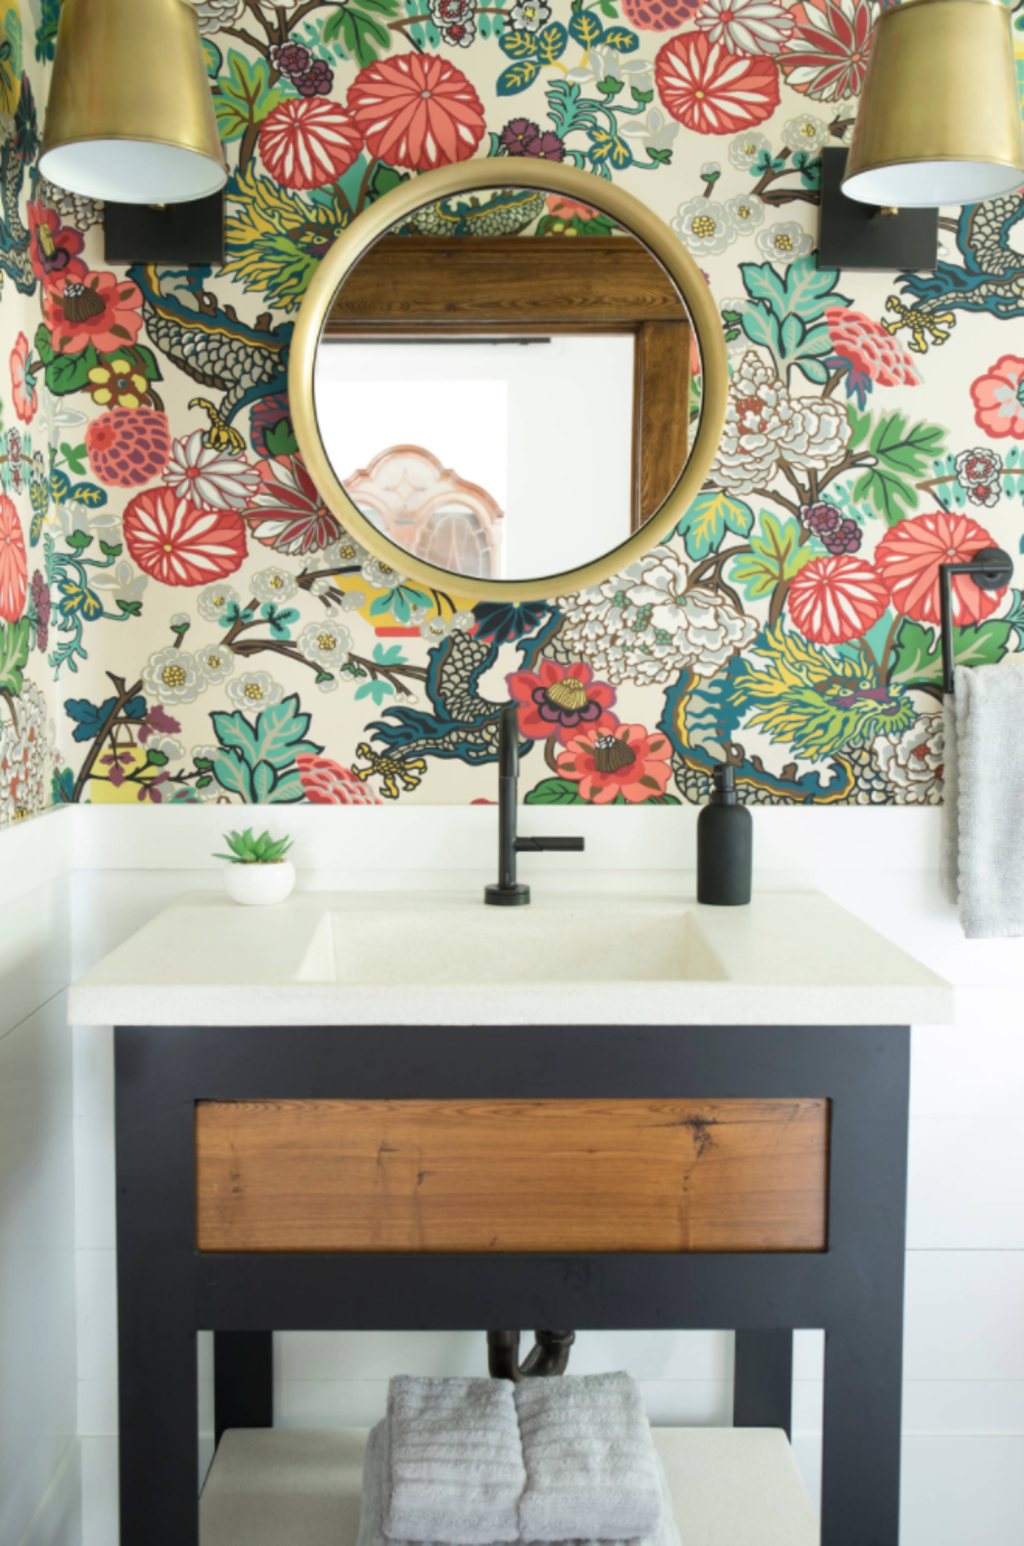 How To Choose A Bathroom Mirror You Ll Love, What Size Mirror For 31 Vanity